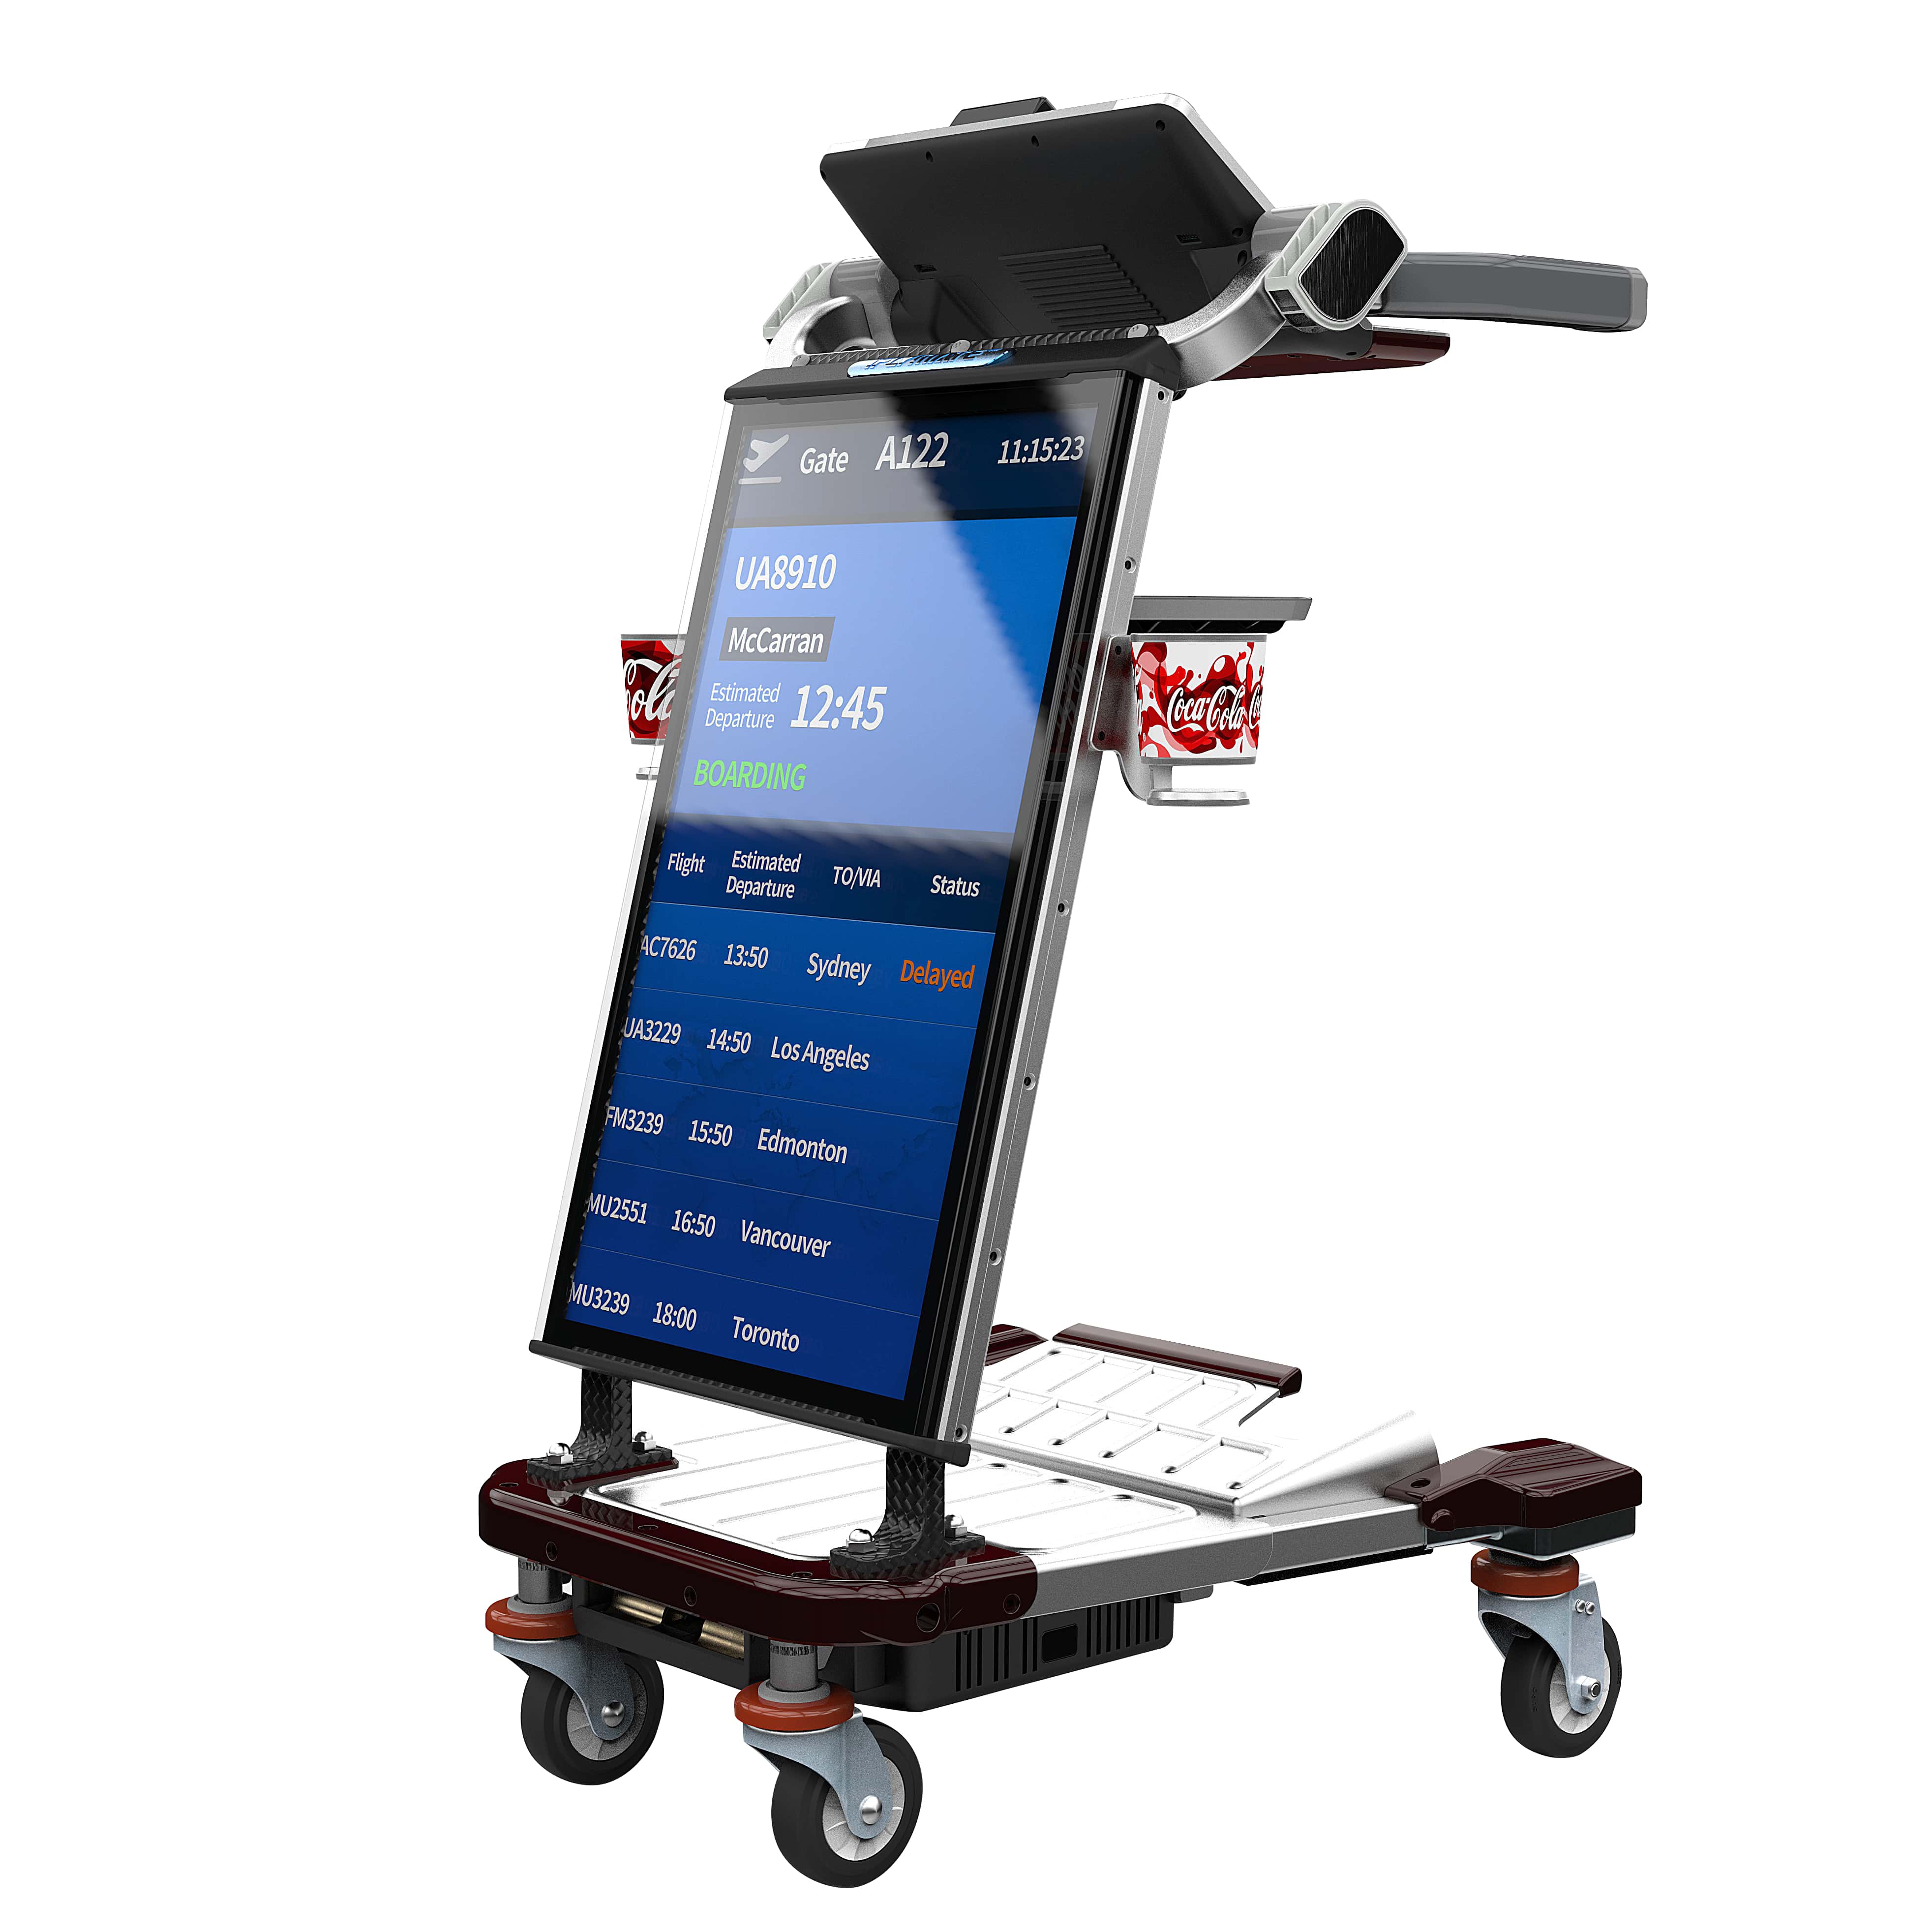 Chigoo's airport trolley will guide, inform and entertain - Airport ...